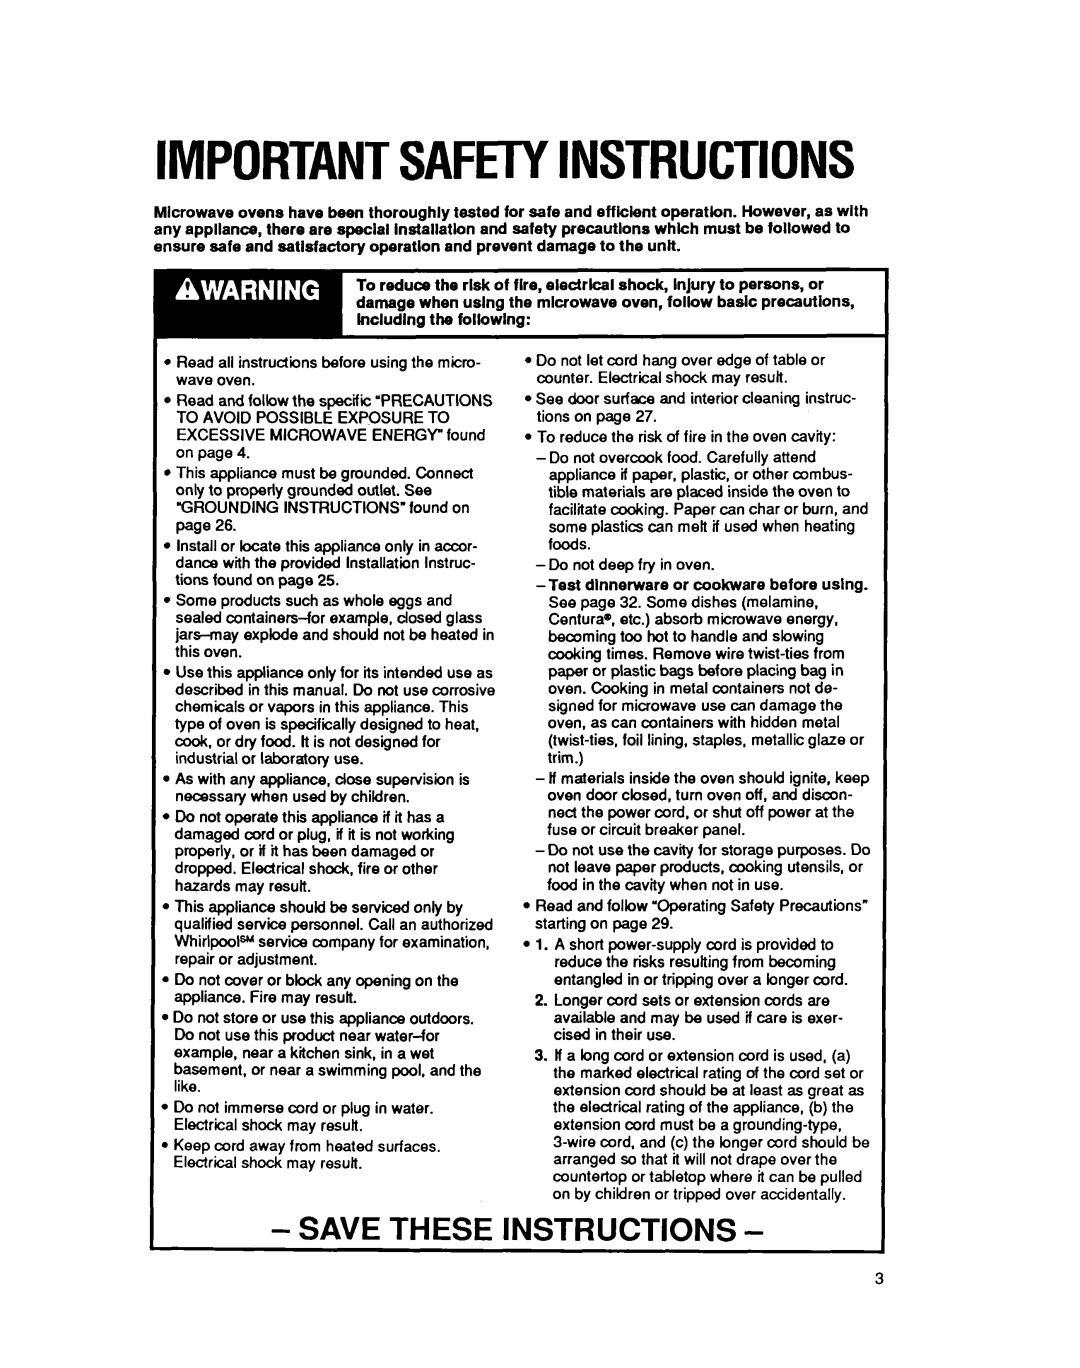 Whirlpool MS3080XY user manual Importantsafetyinstructions, Save These Instructions 